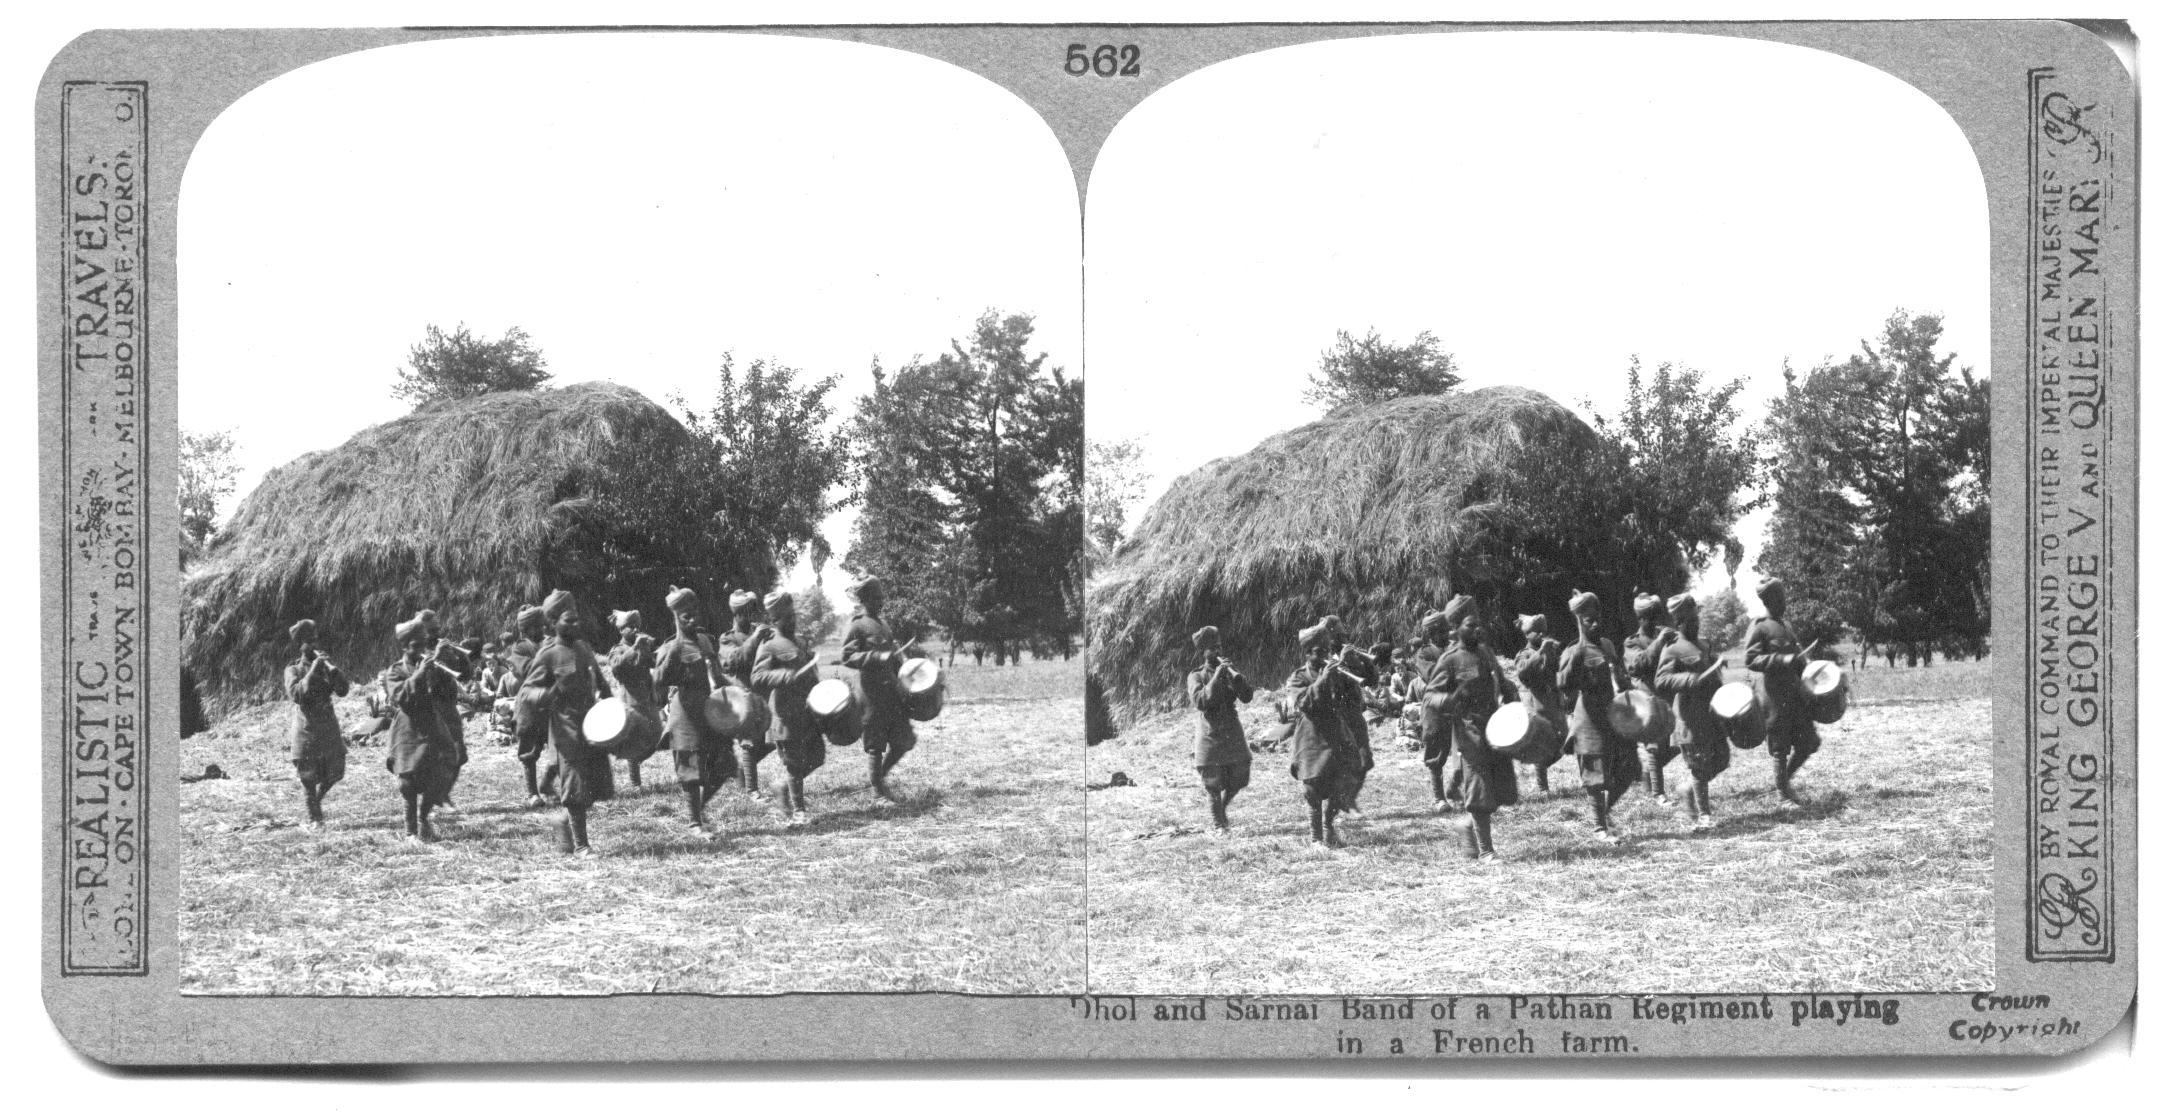 Dhol and Sarnai Band of a Pathan Regiment playing in a French farm